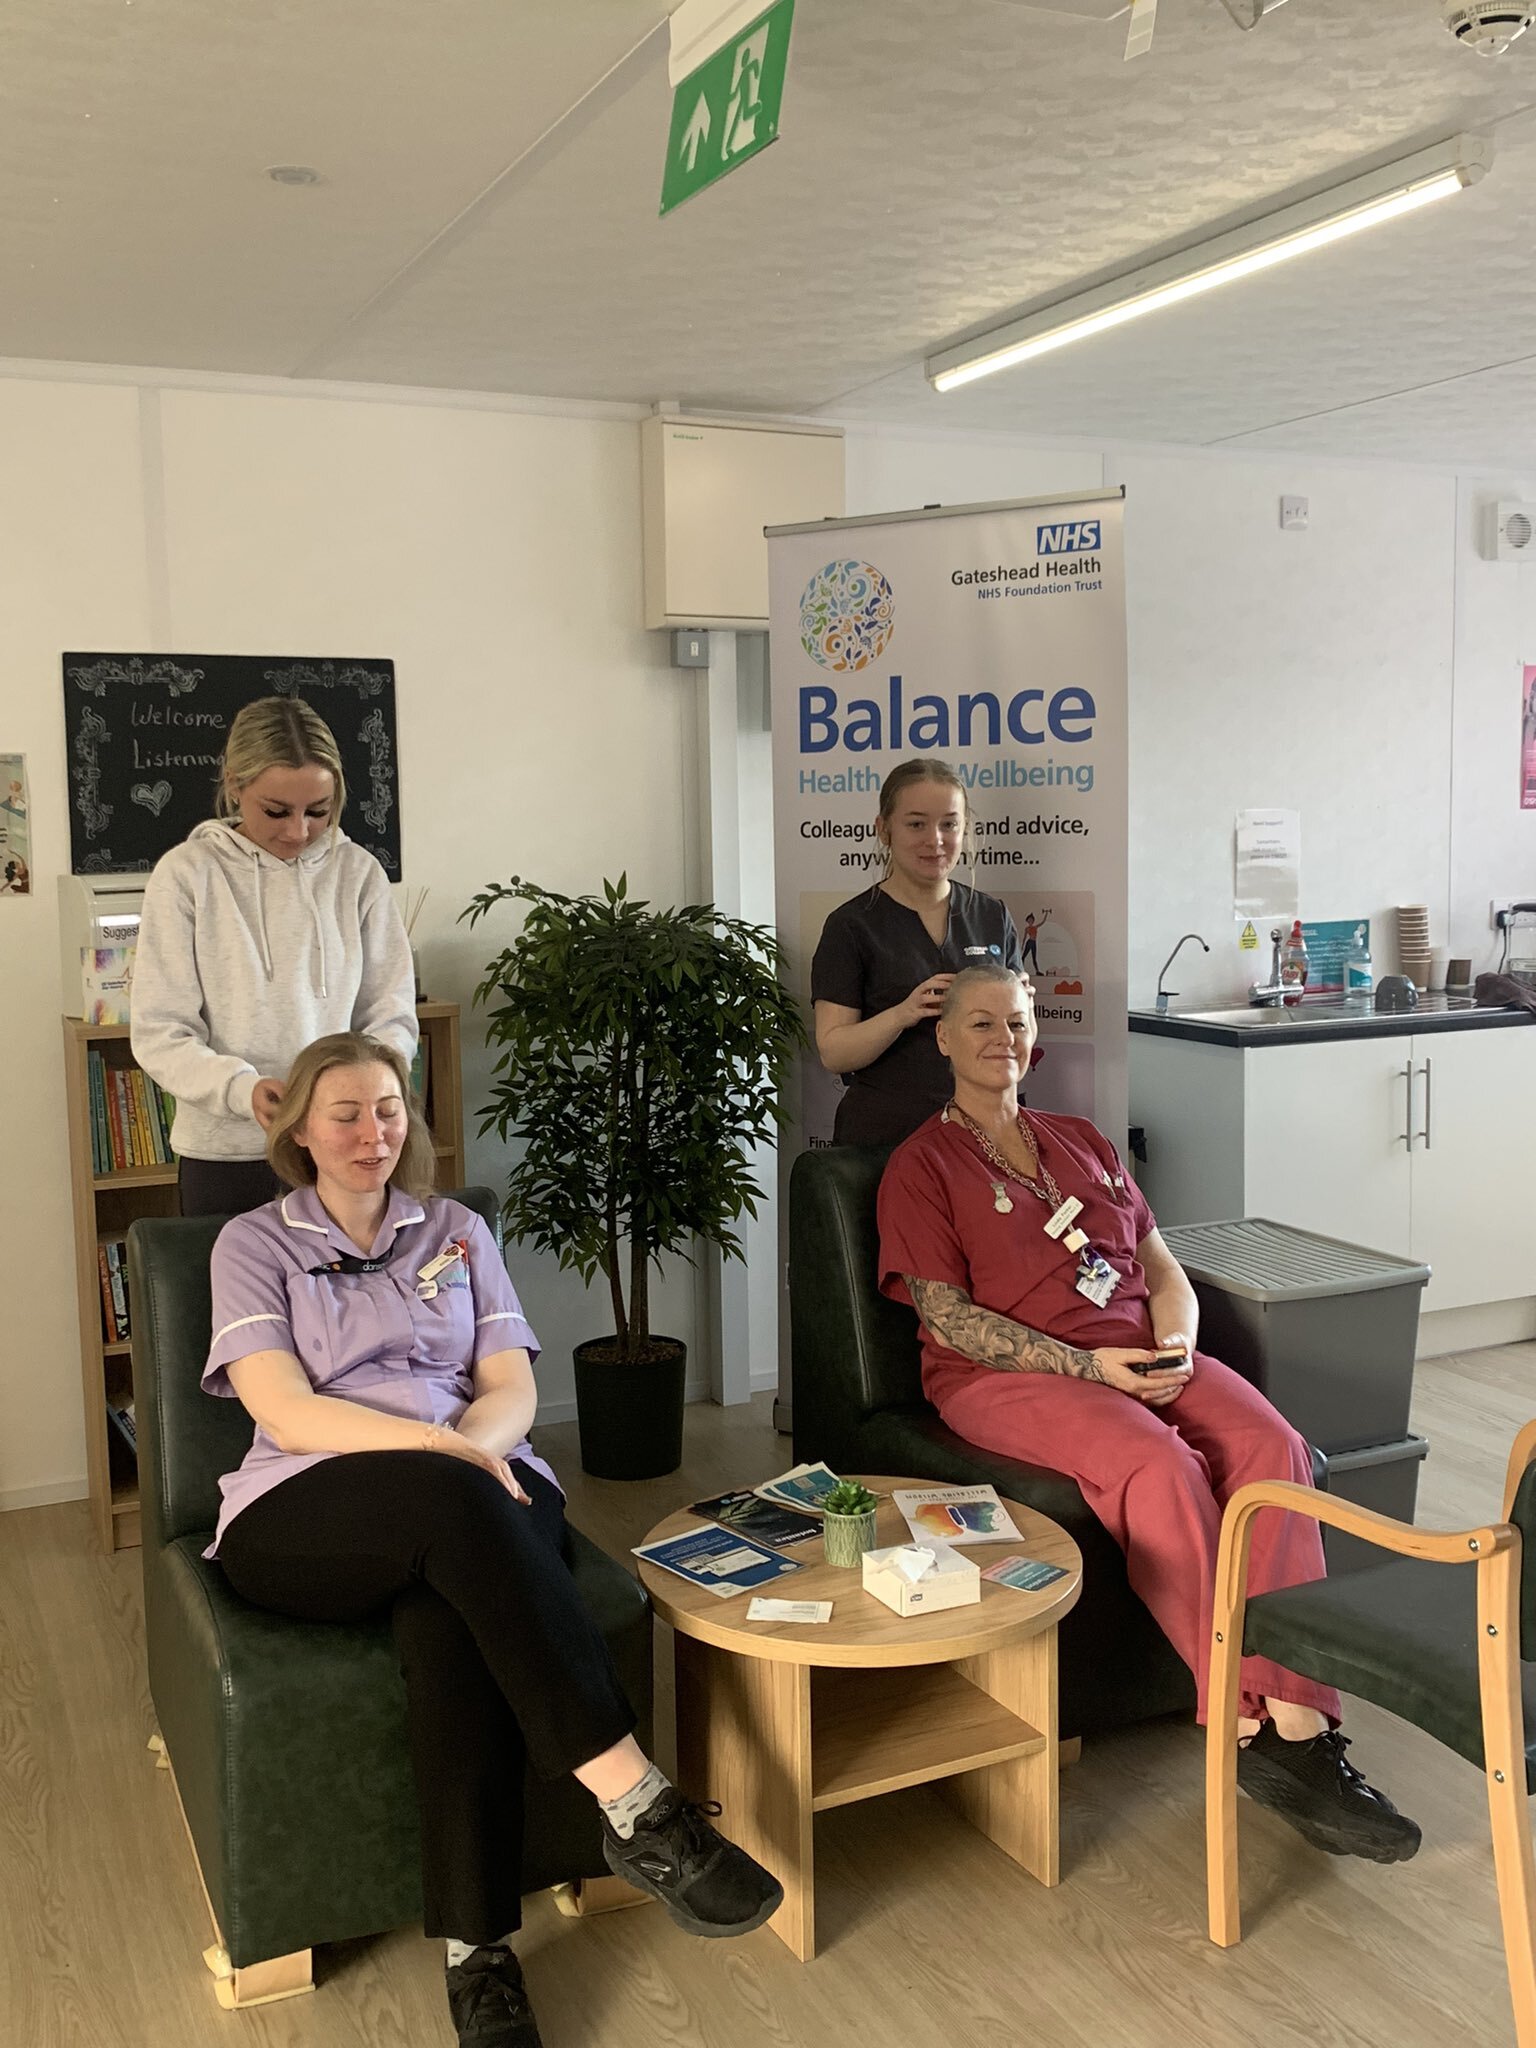 Two Gateshead Health nurses receive Indian Head massages in the Listening Space at the QE Hospital from Gateshead College Botanica Salon students